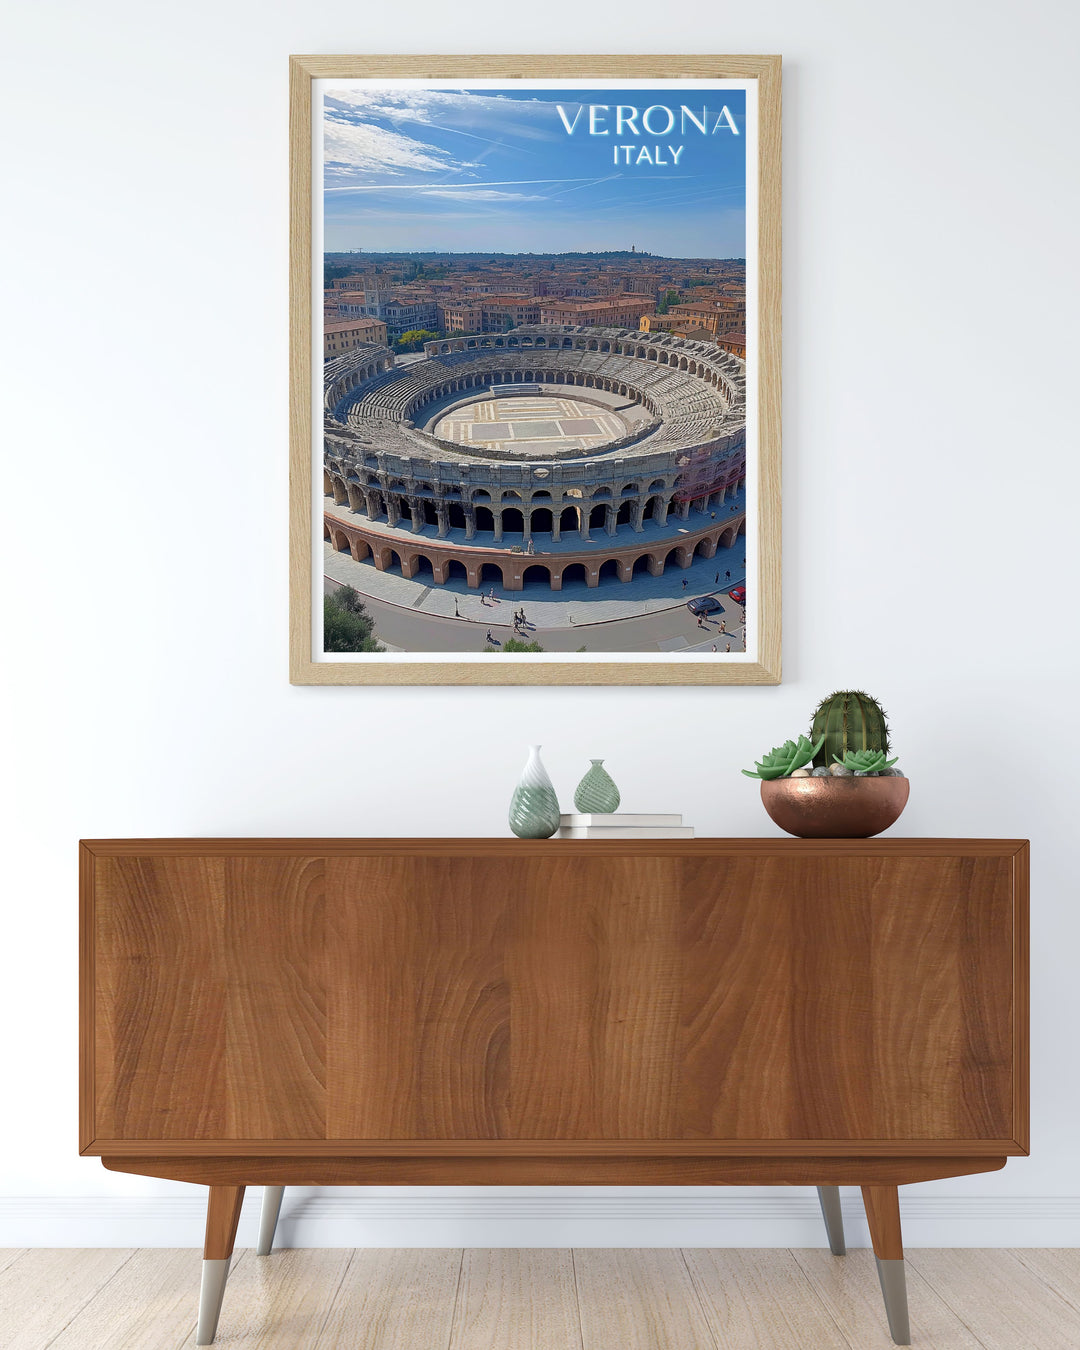 Captivating vintage print of Arena de Verona in Italy designed to bring the essence of this historic amphitheater into your home an ideal addition to your collection of Italy wall posters and Verona wall decor.